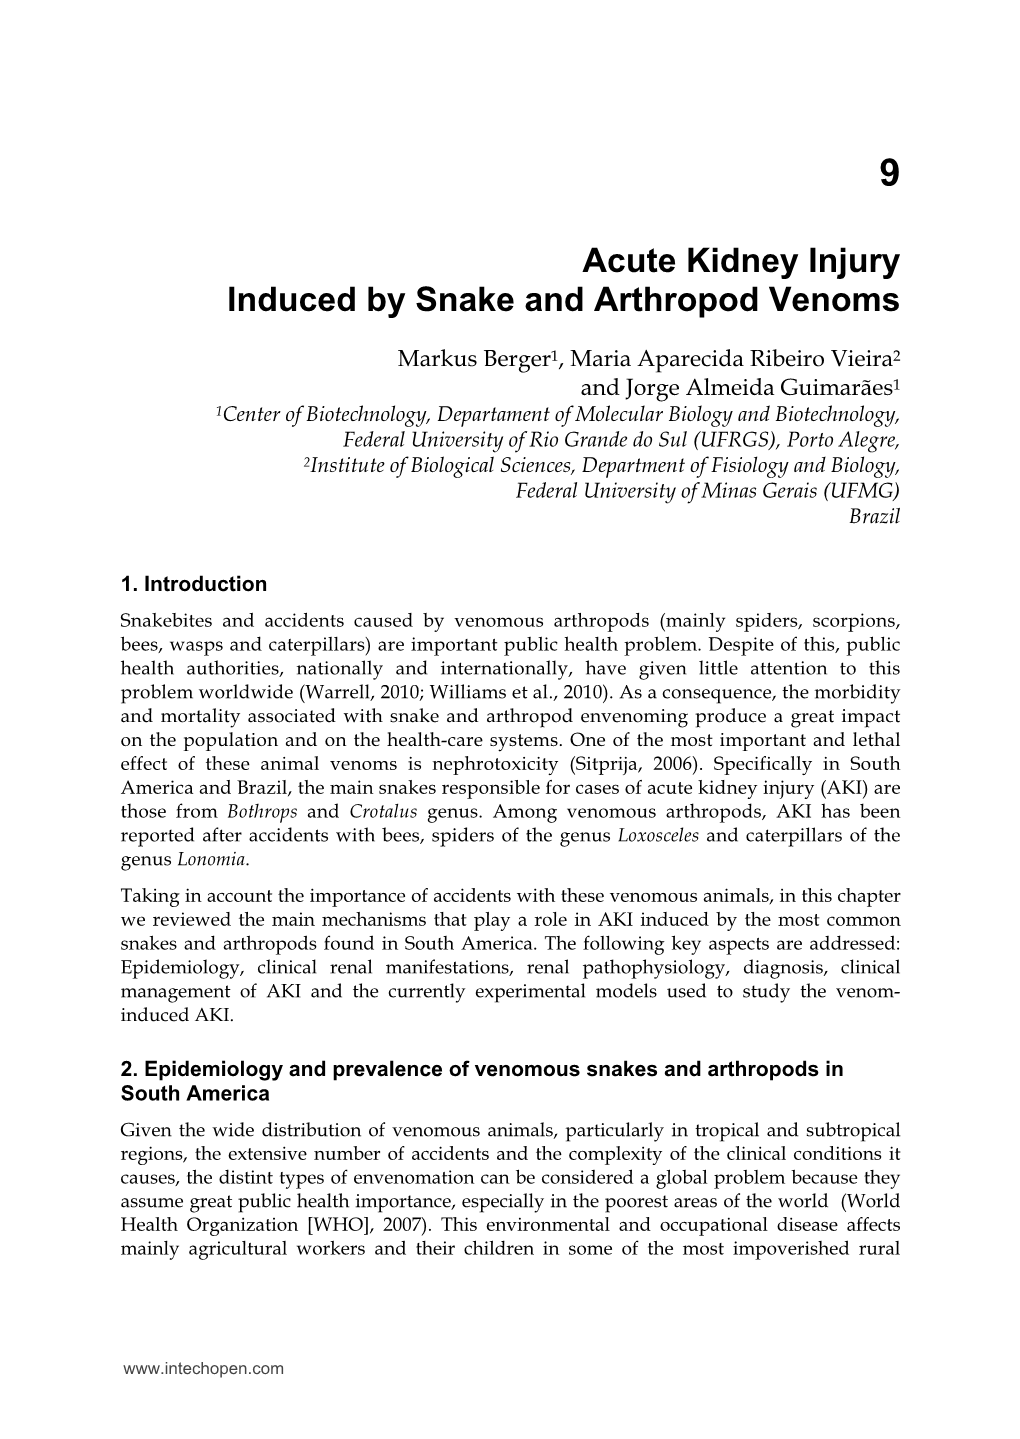 Acute Kidney Injury Induced by Snake and Arthropod Venoms